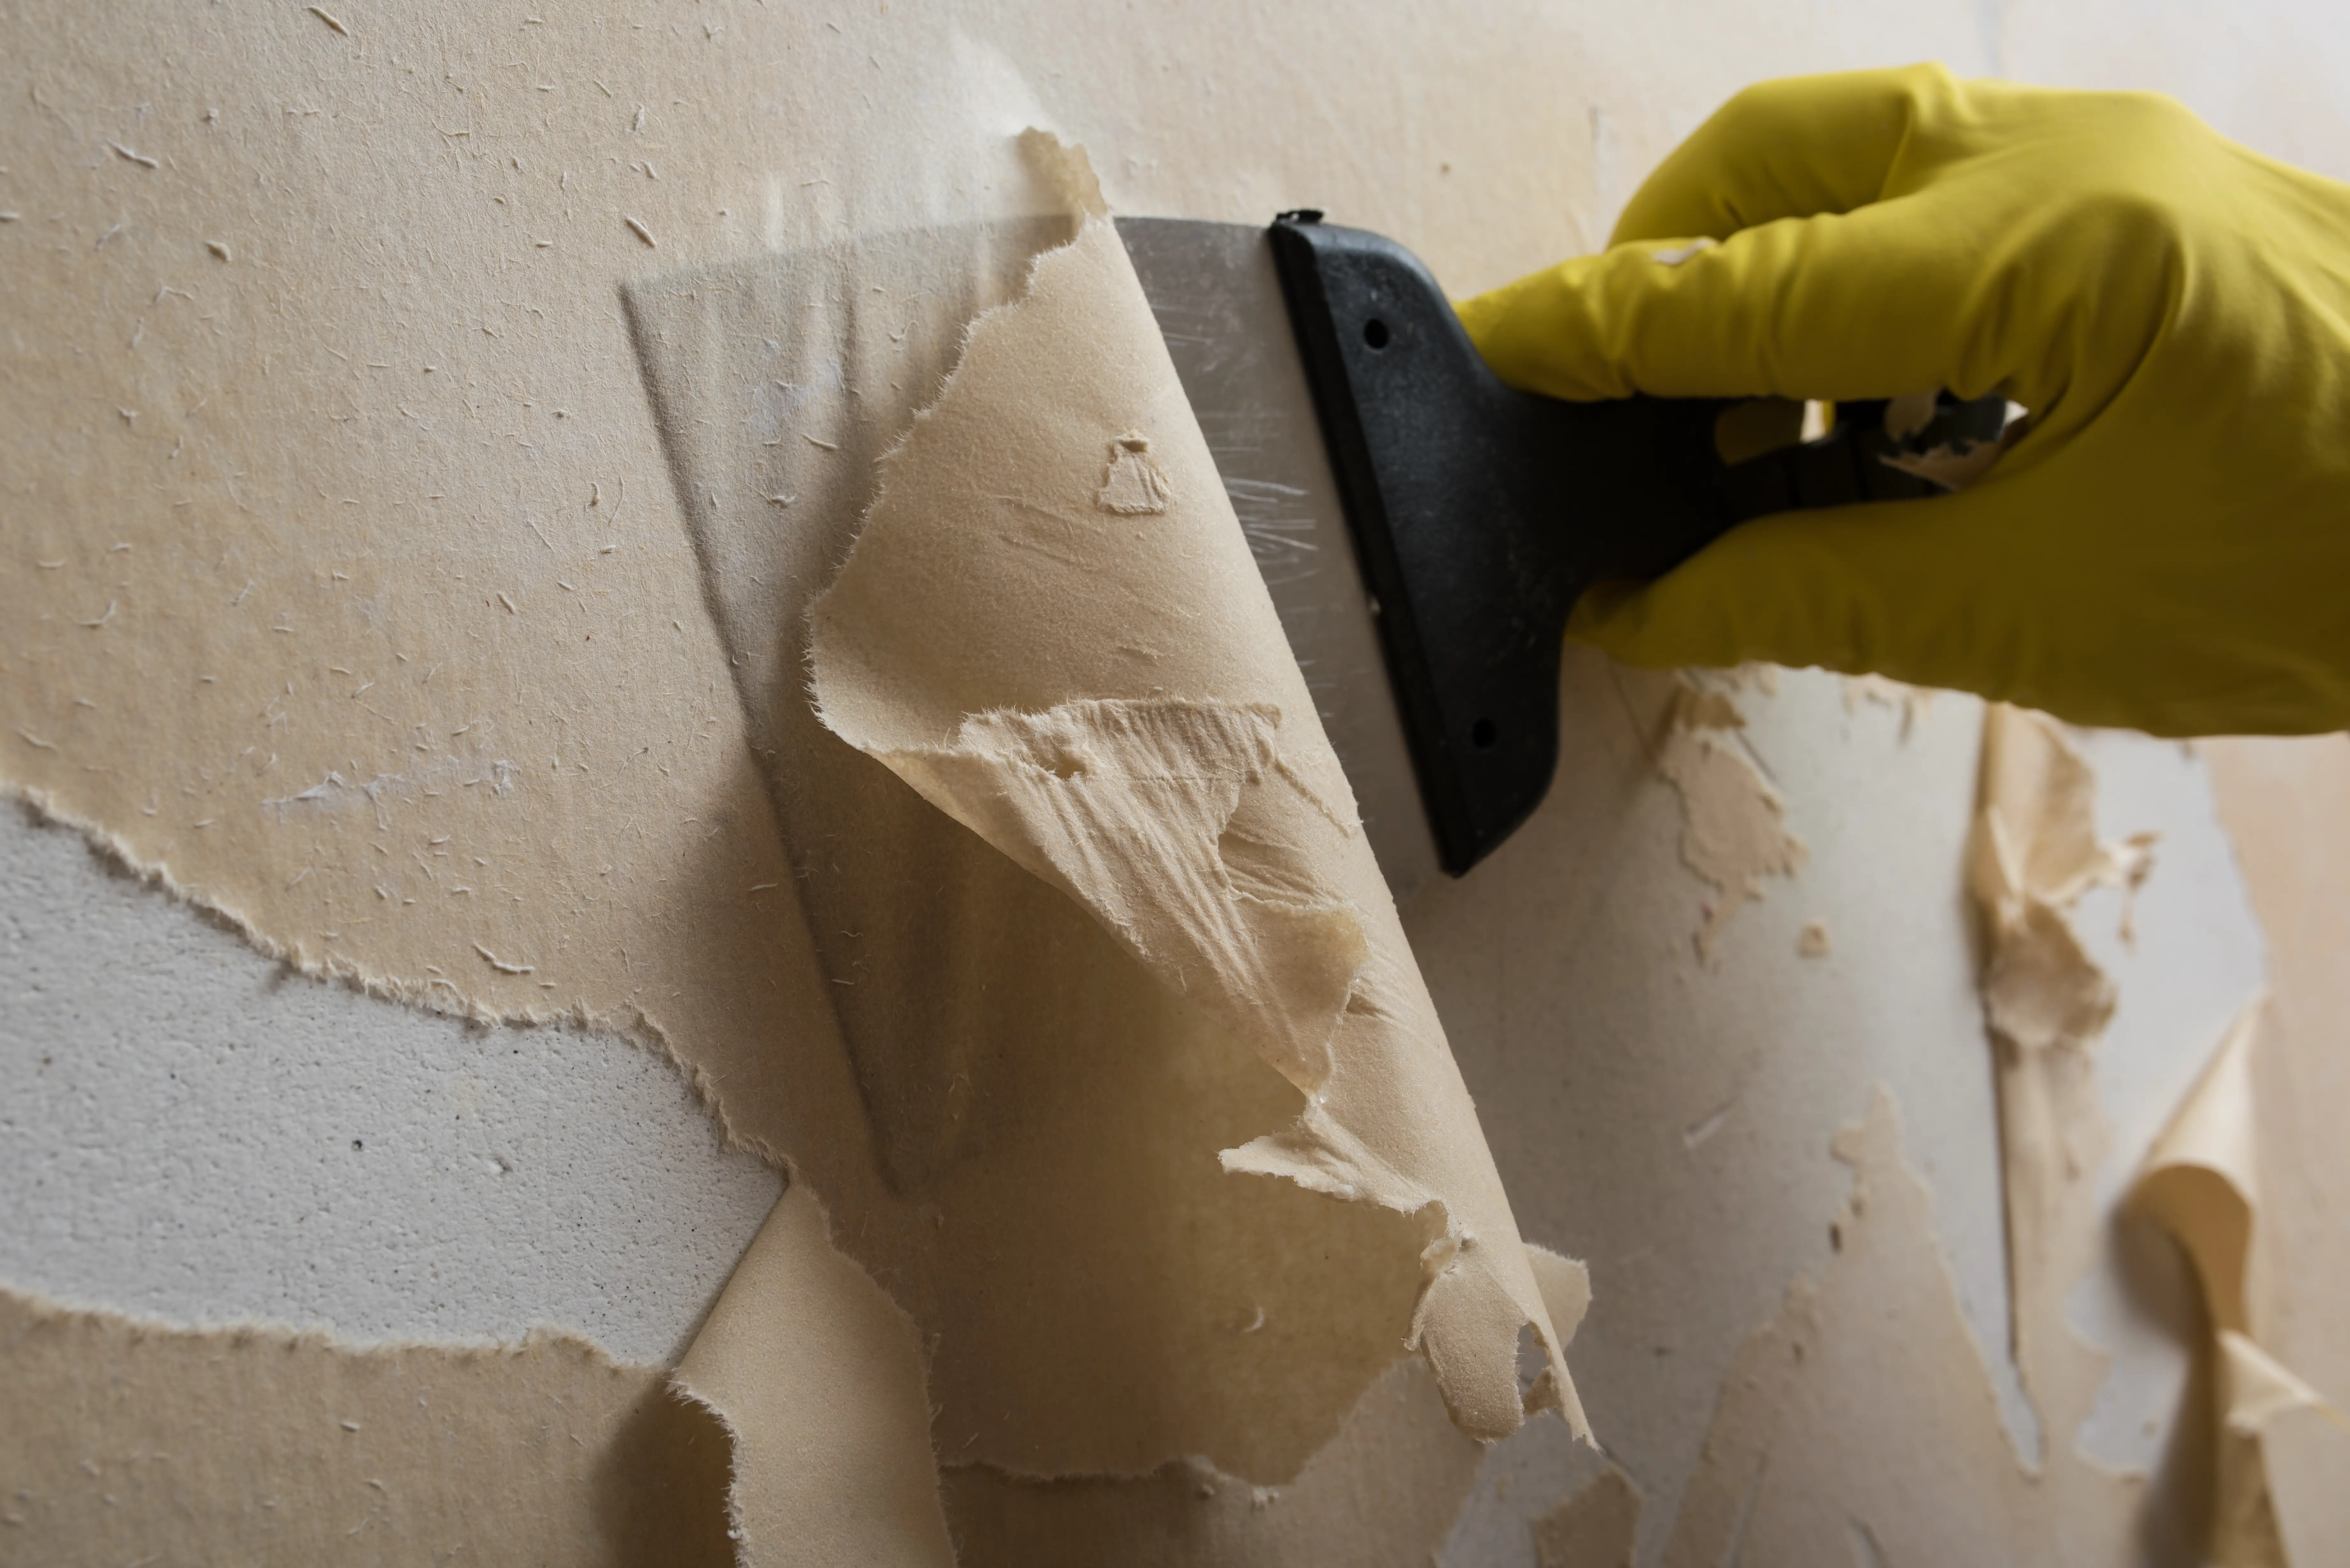 Wallpaper Can Cause Mold. Here's What To Do – House Overhaul